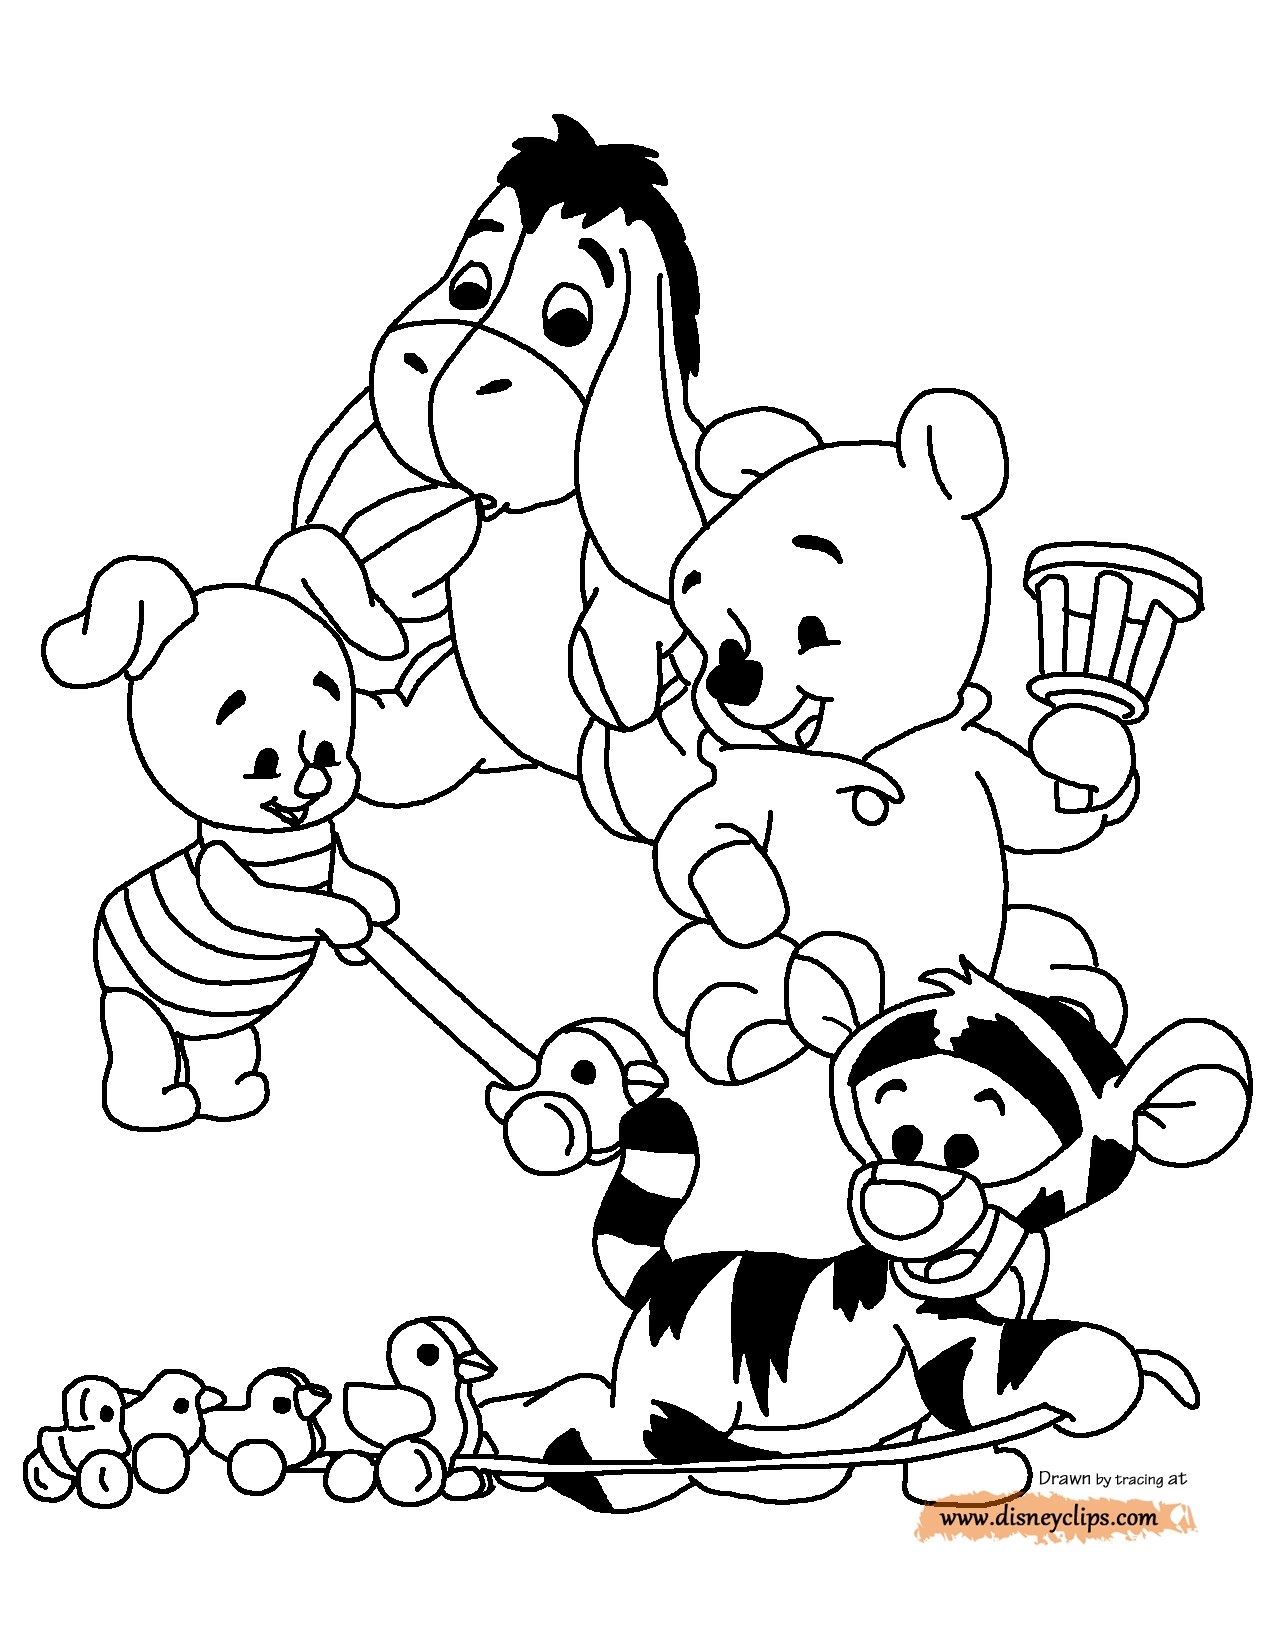 Poo Colouring Pages at GetColorings.com | Free printable ...